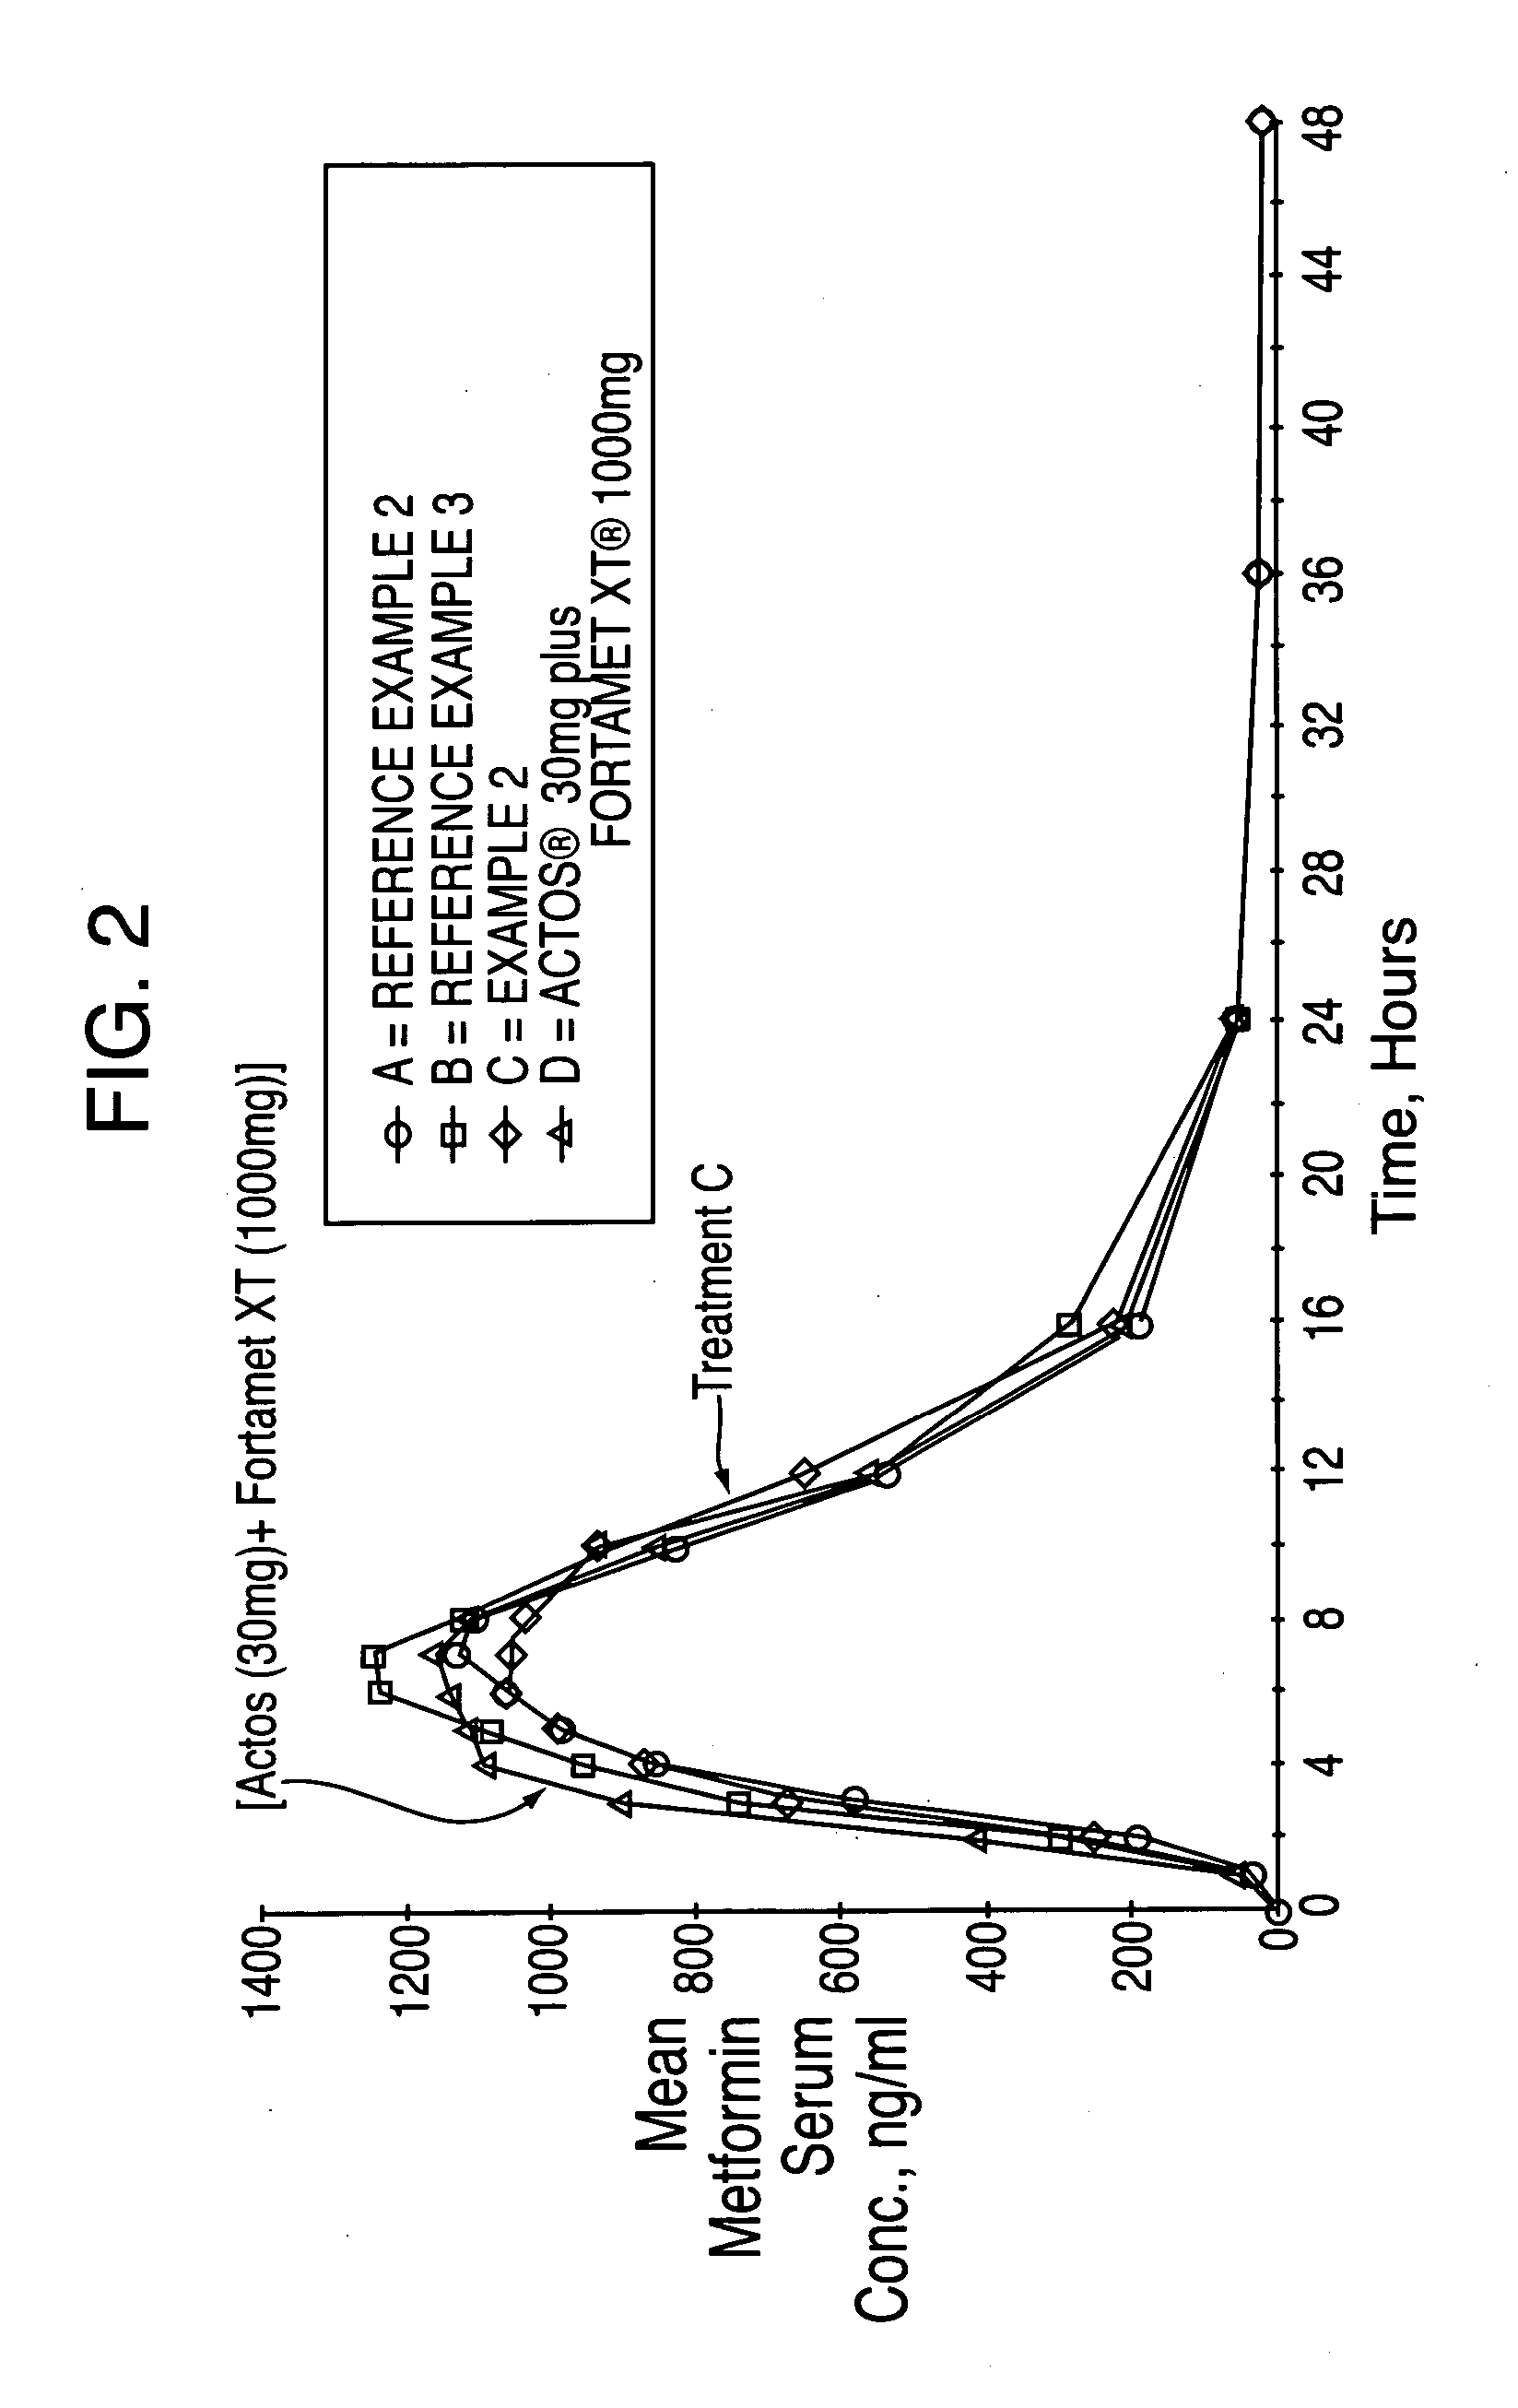 Novel pharmaceutical formulation containing a biguanide and a thiazolidinedione derivative